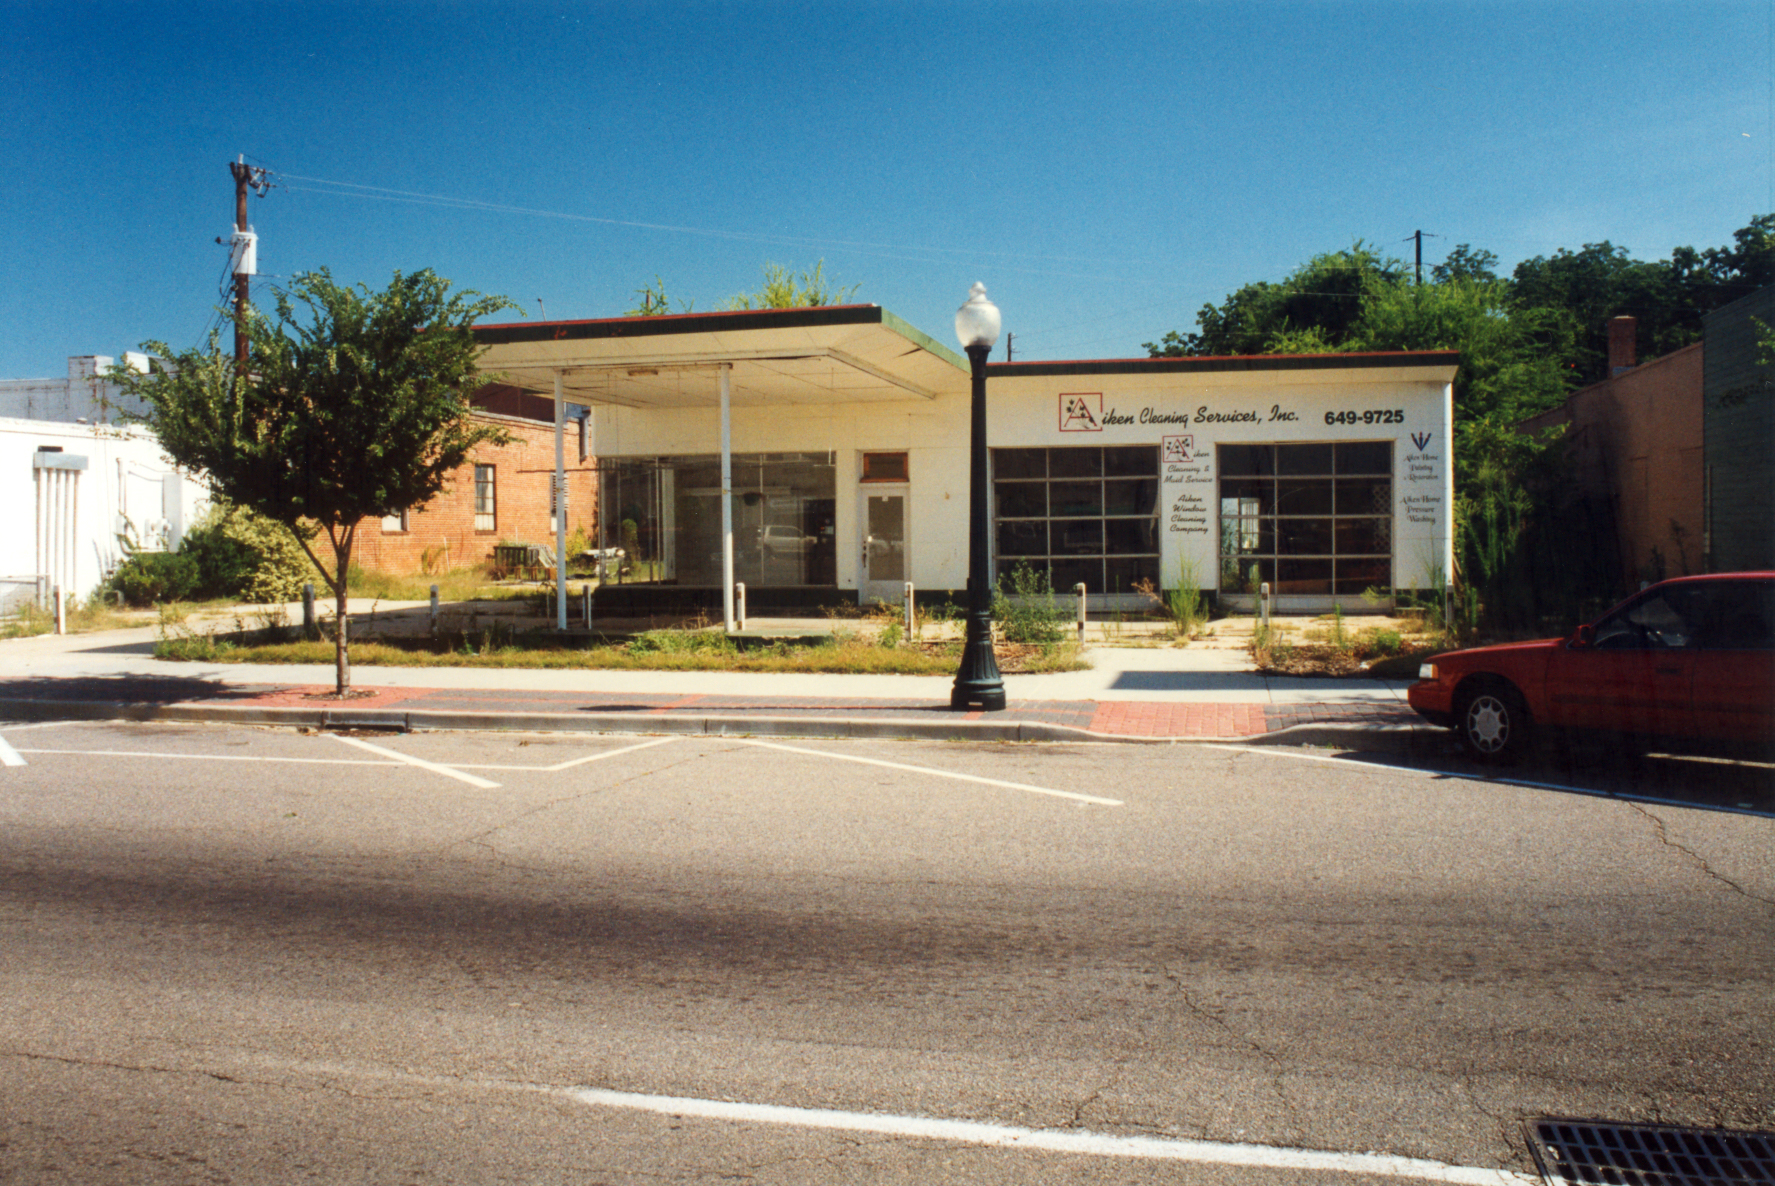 Richland Avenue Gas Station looking north